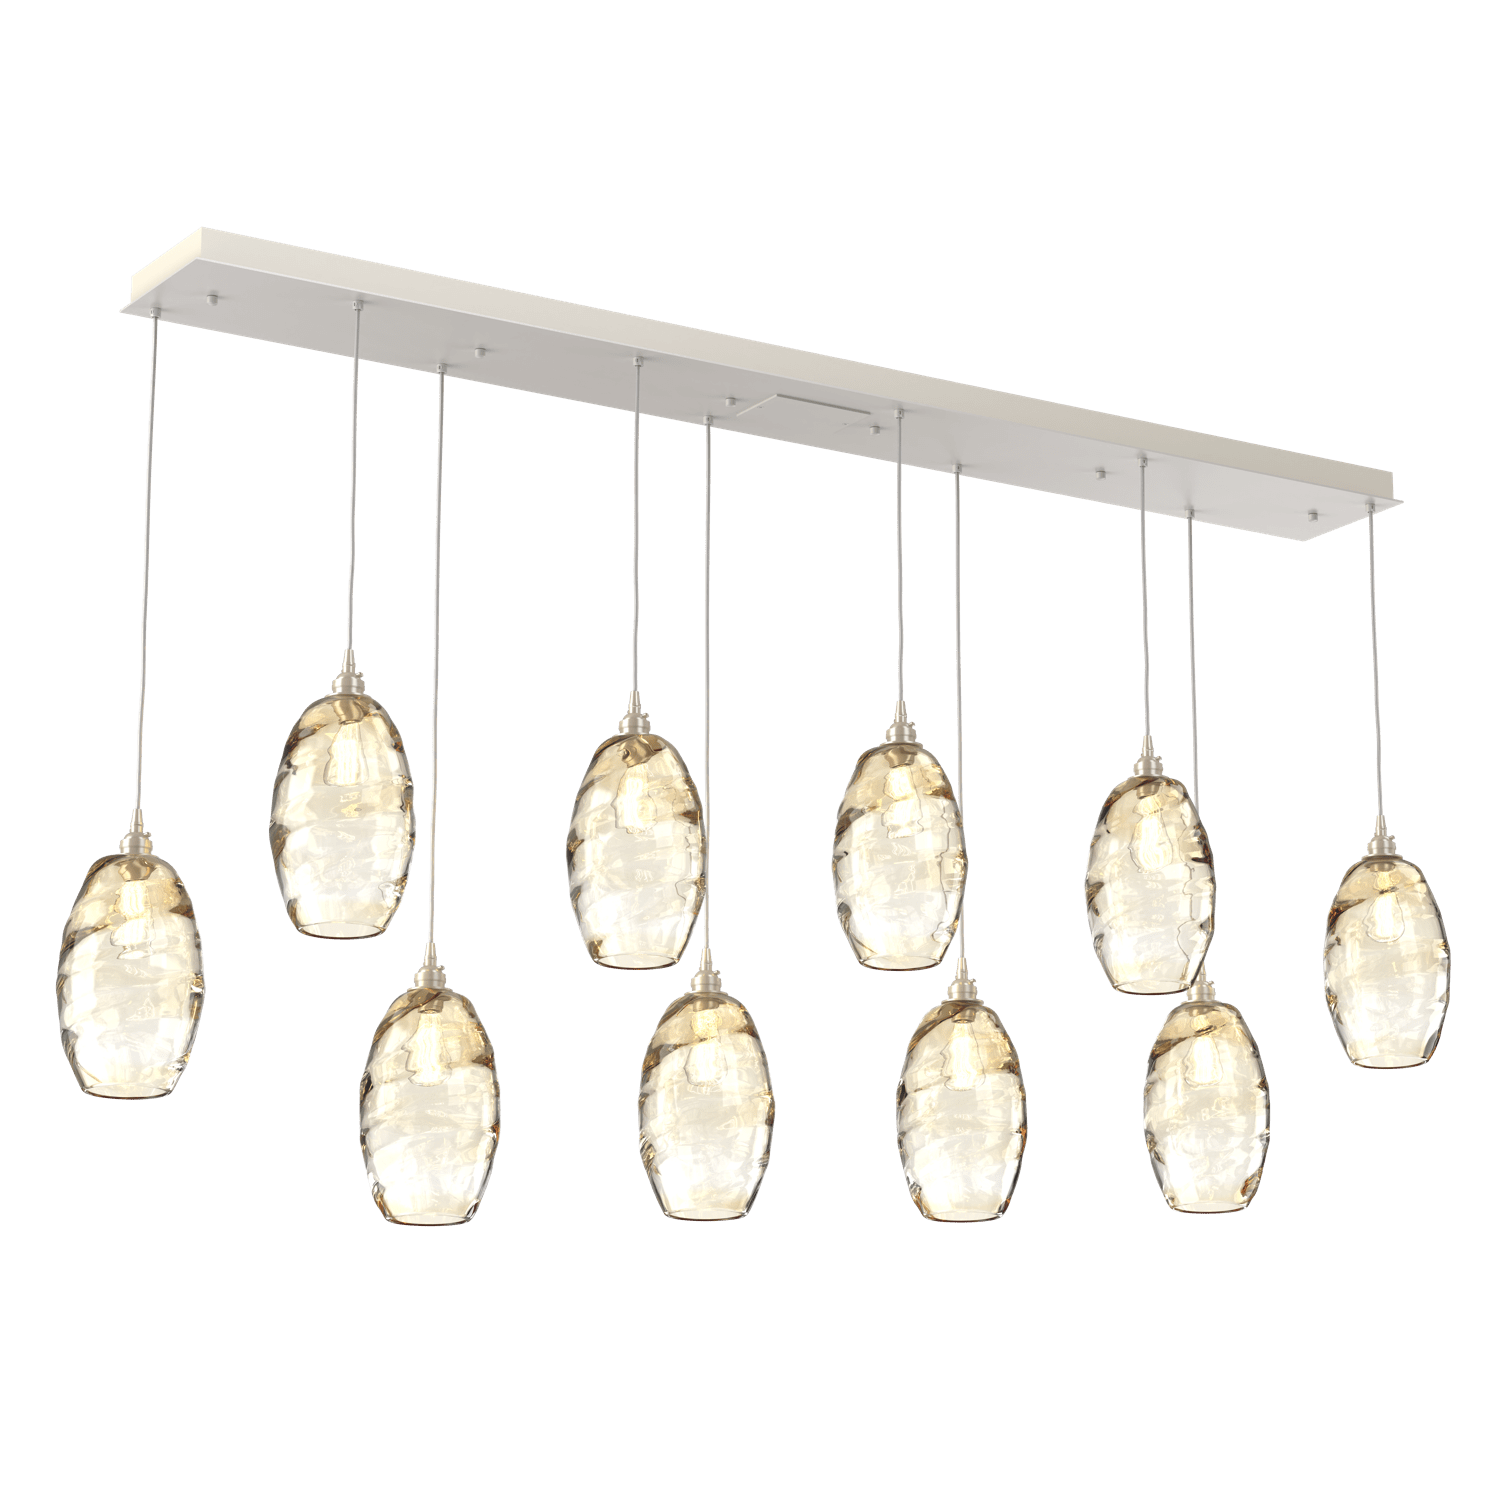 PLB0035-10-BS-OA-Hammerton-Studio-Optic-Blown-Glass-Elisse-10-light-linear-pendant-chandelier-with-metallic-beige-silver-finish-and-optic-amber-blown-glass-shades-and-incandescent-lamping